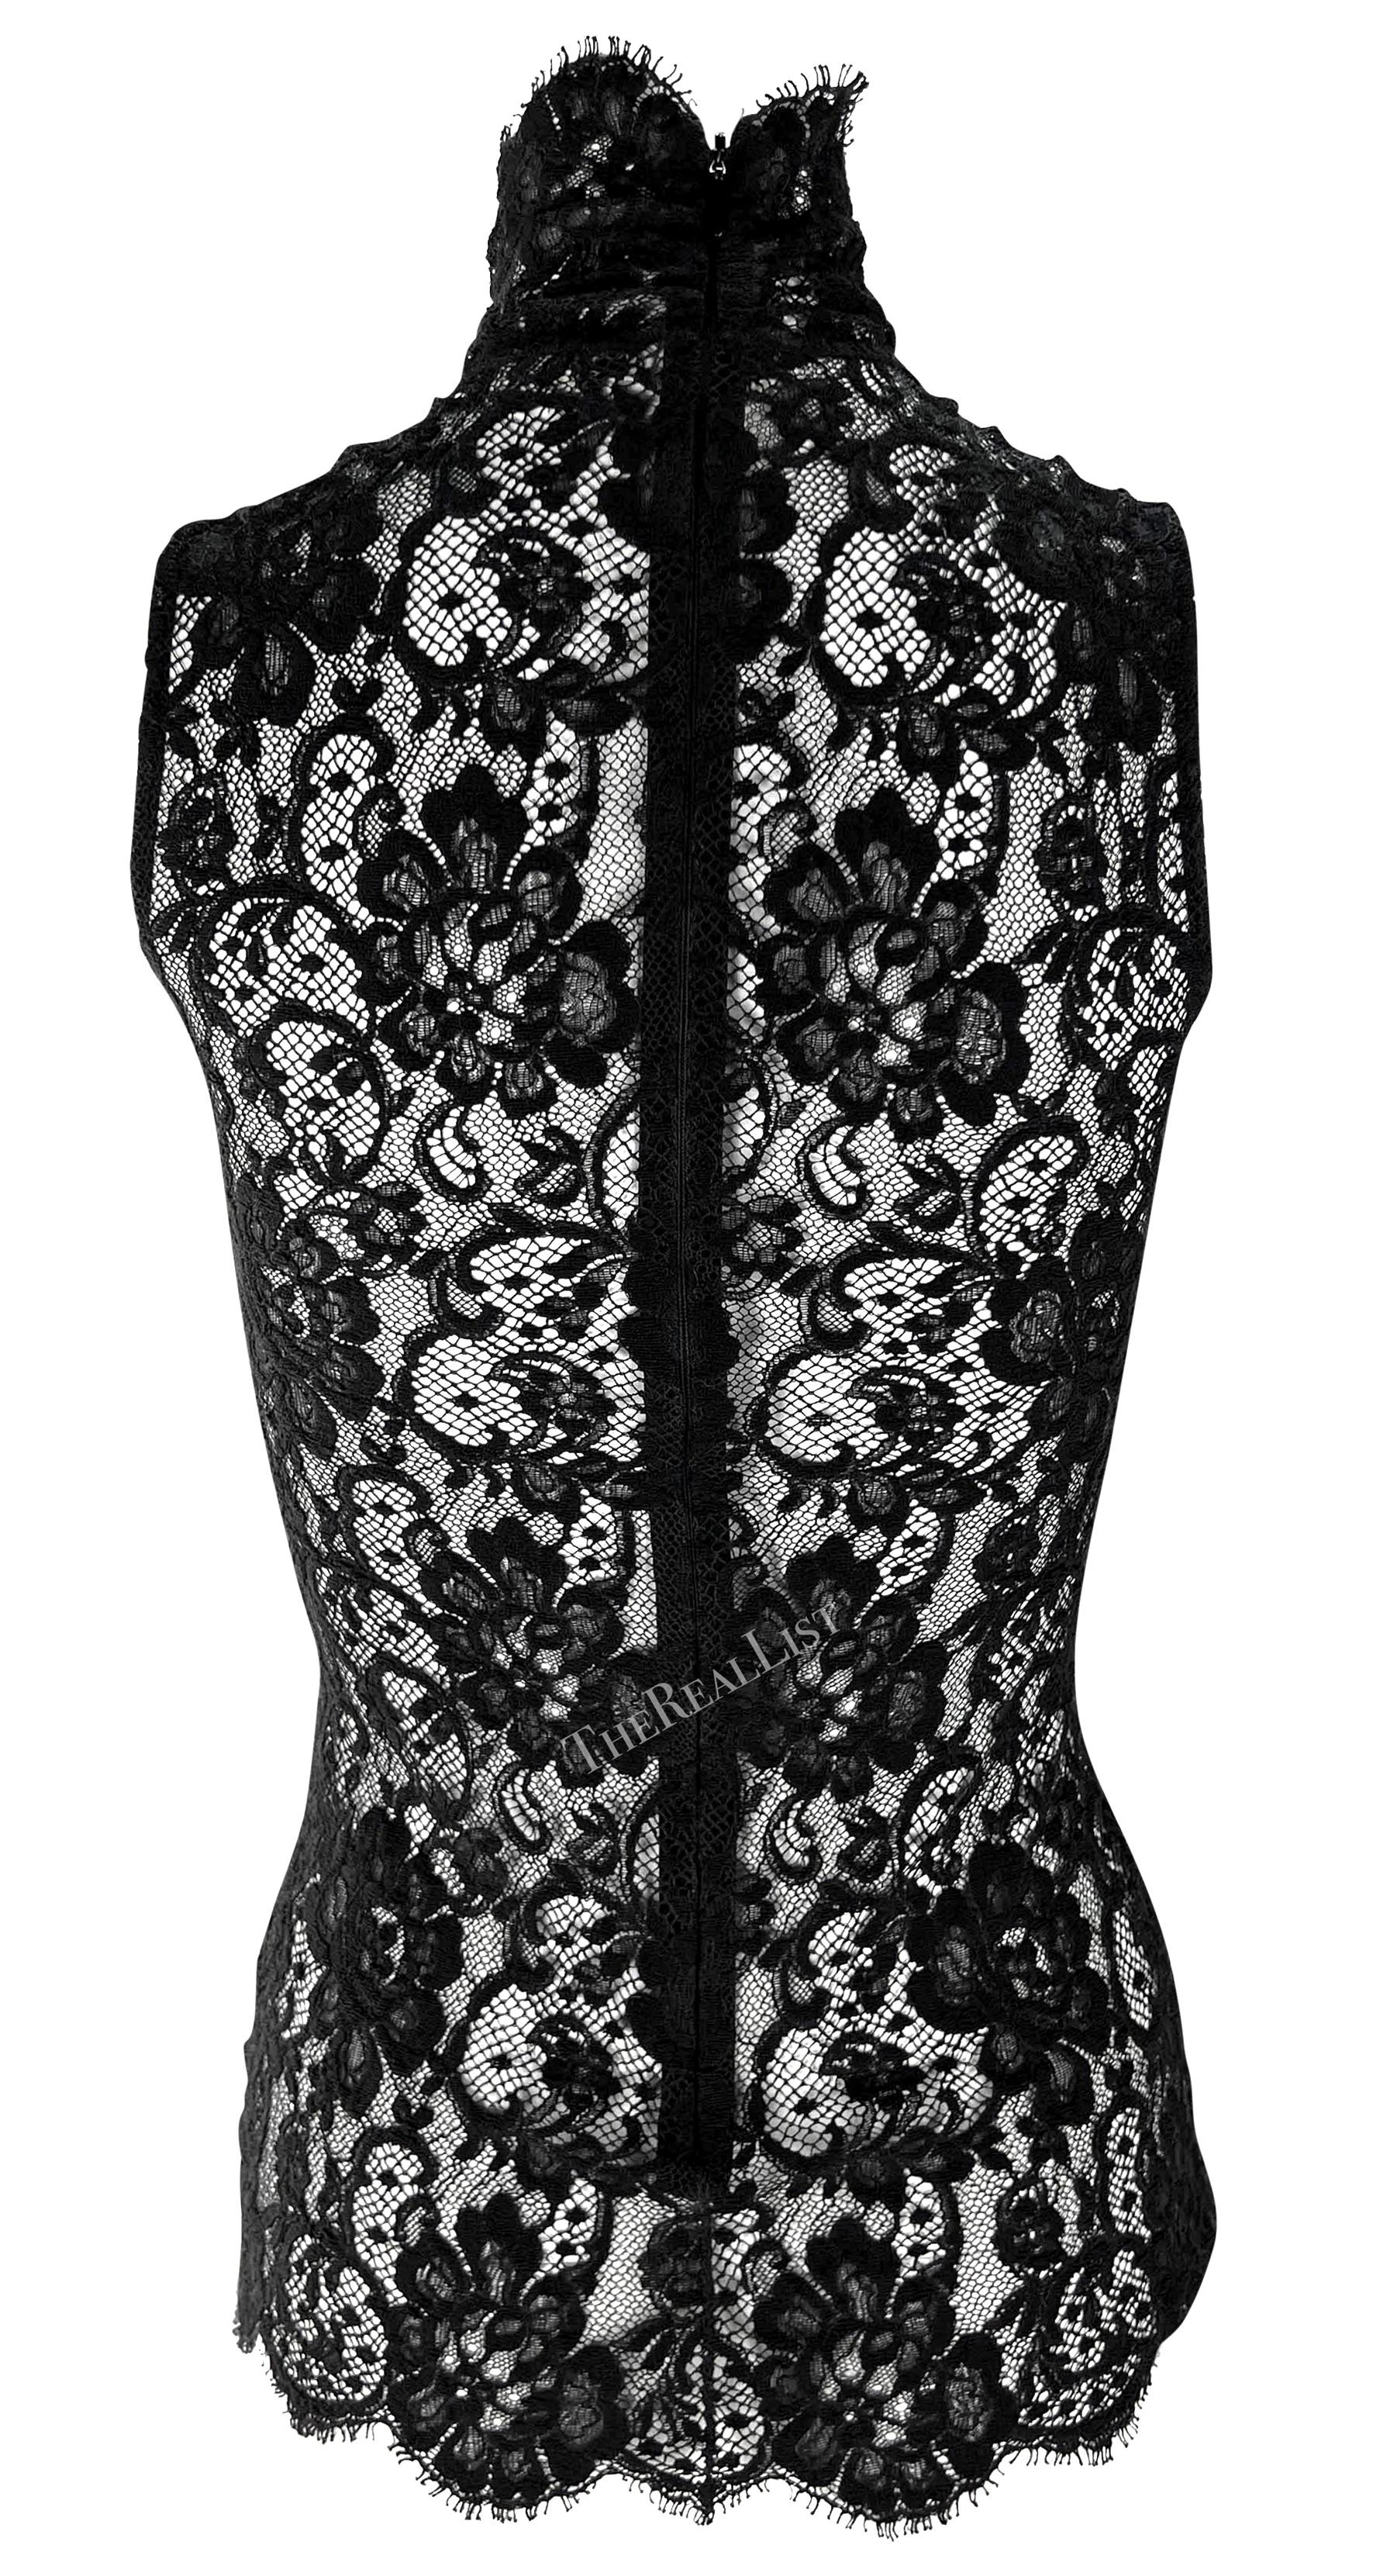 F/W 2002 Dolce & Gabbana Sheer Lace Black Mock Neck Sleeveless Top For Sale 1